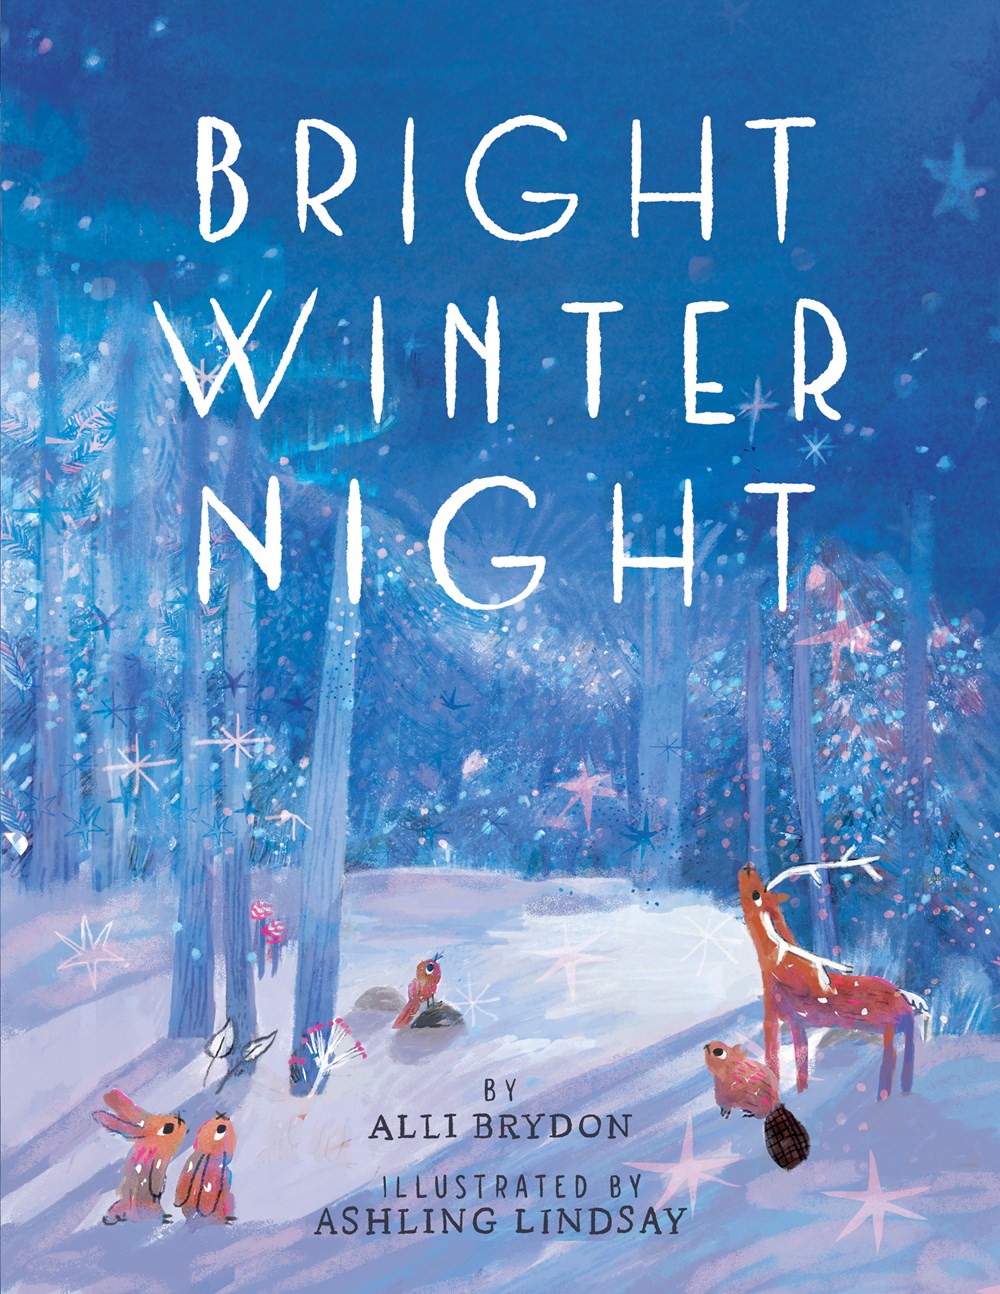 Cover of Bright Winter Night by Brydon